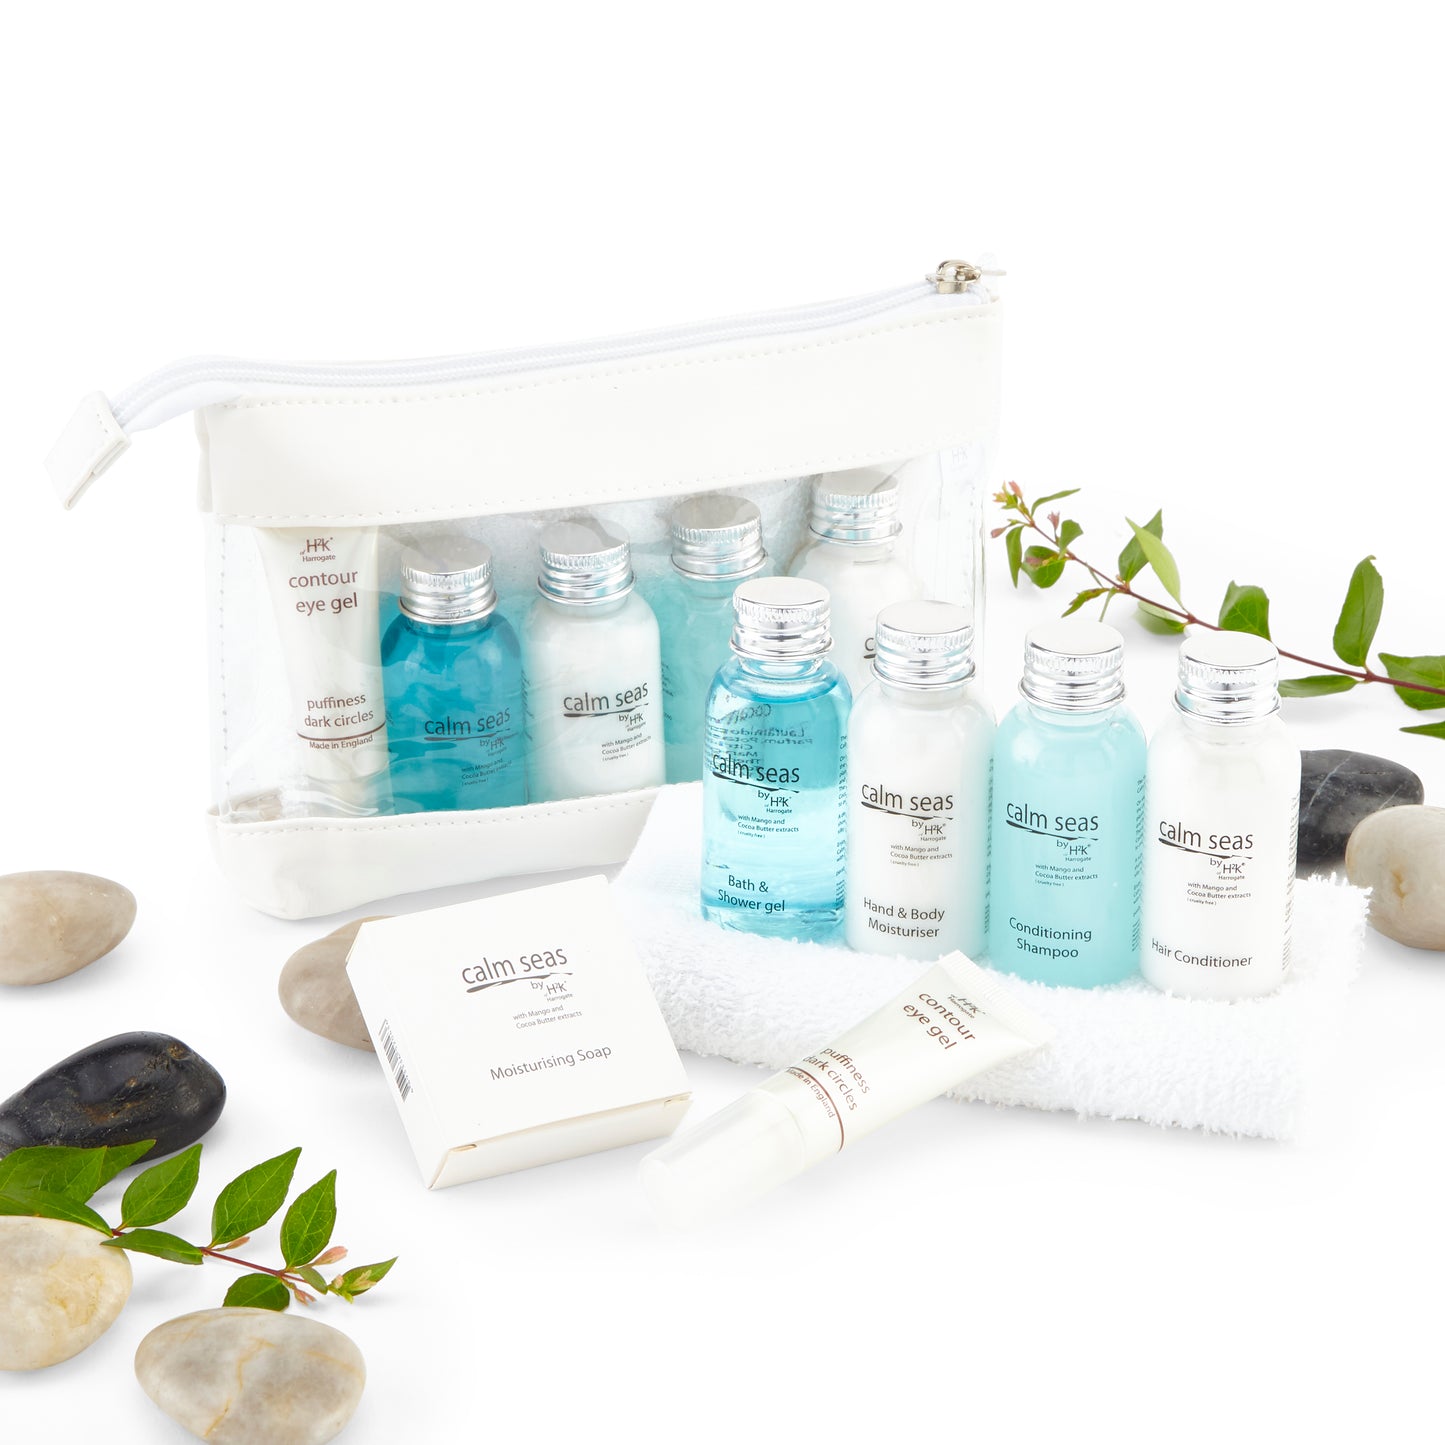 Calm Seas pamper pack with cocoa butter & mango